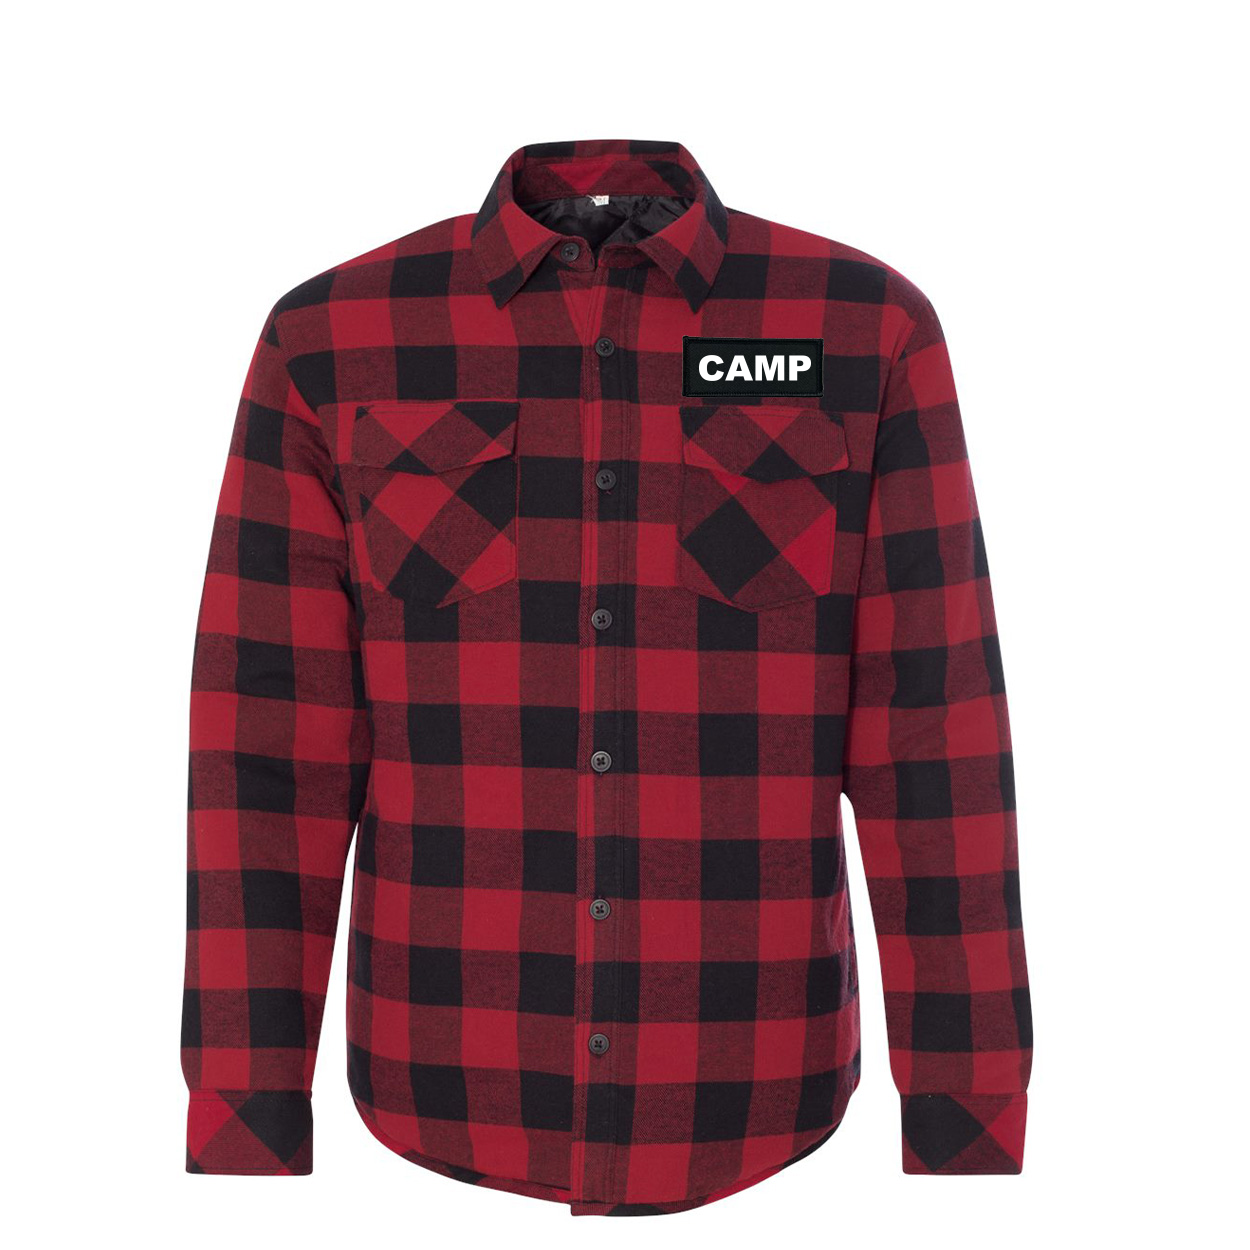 Camp Brand Logo Classic Unisex Woven Patch Quilted Button Flannel Jacket Red/Black Buffalo (White Logo)